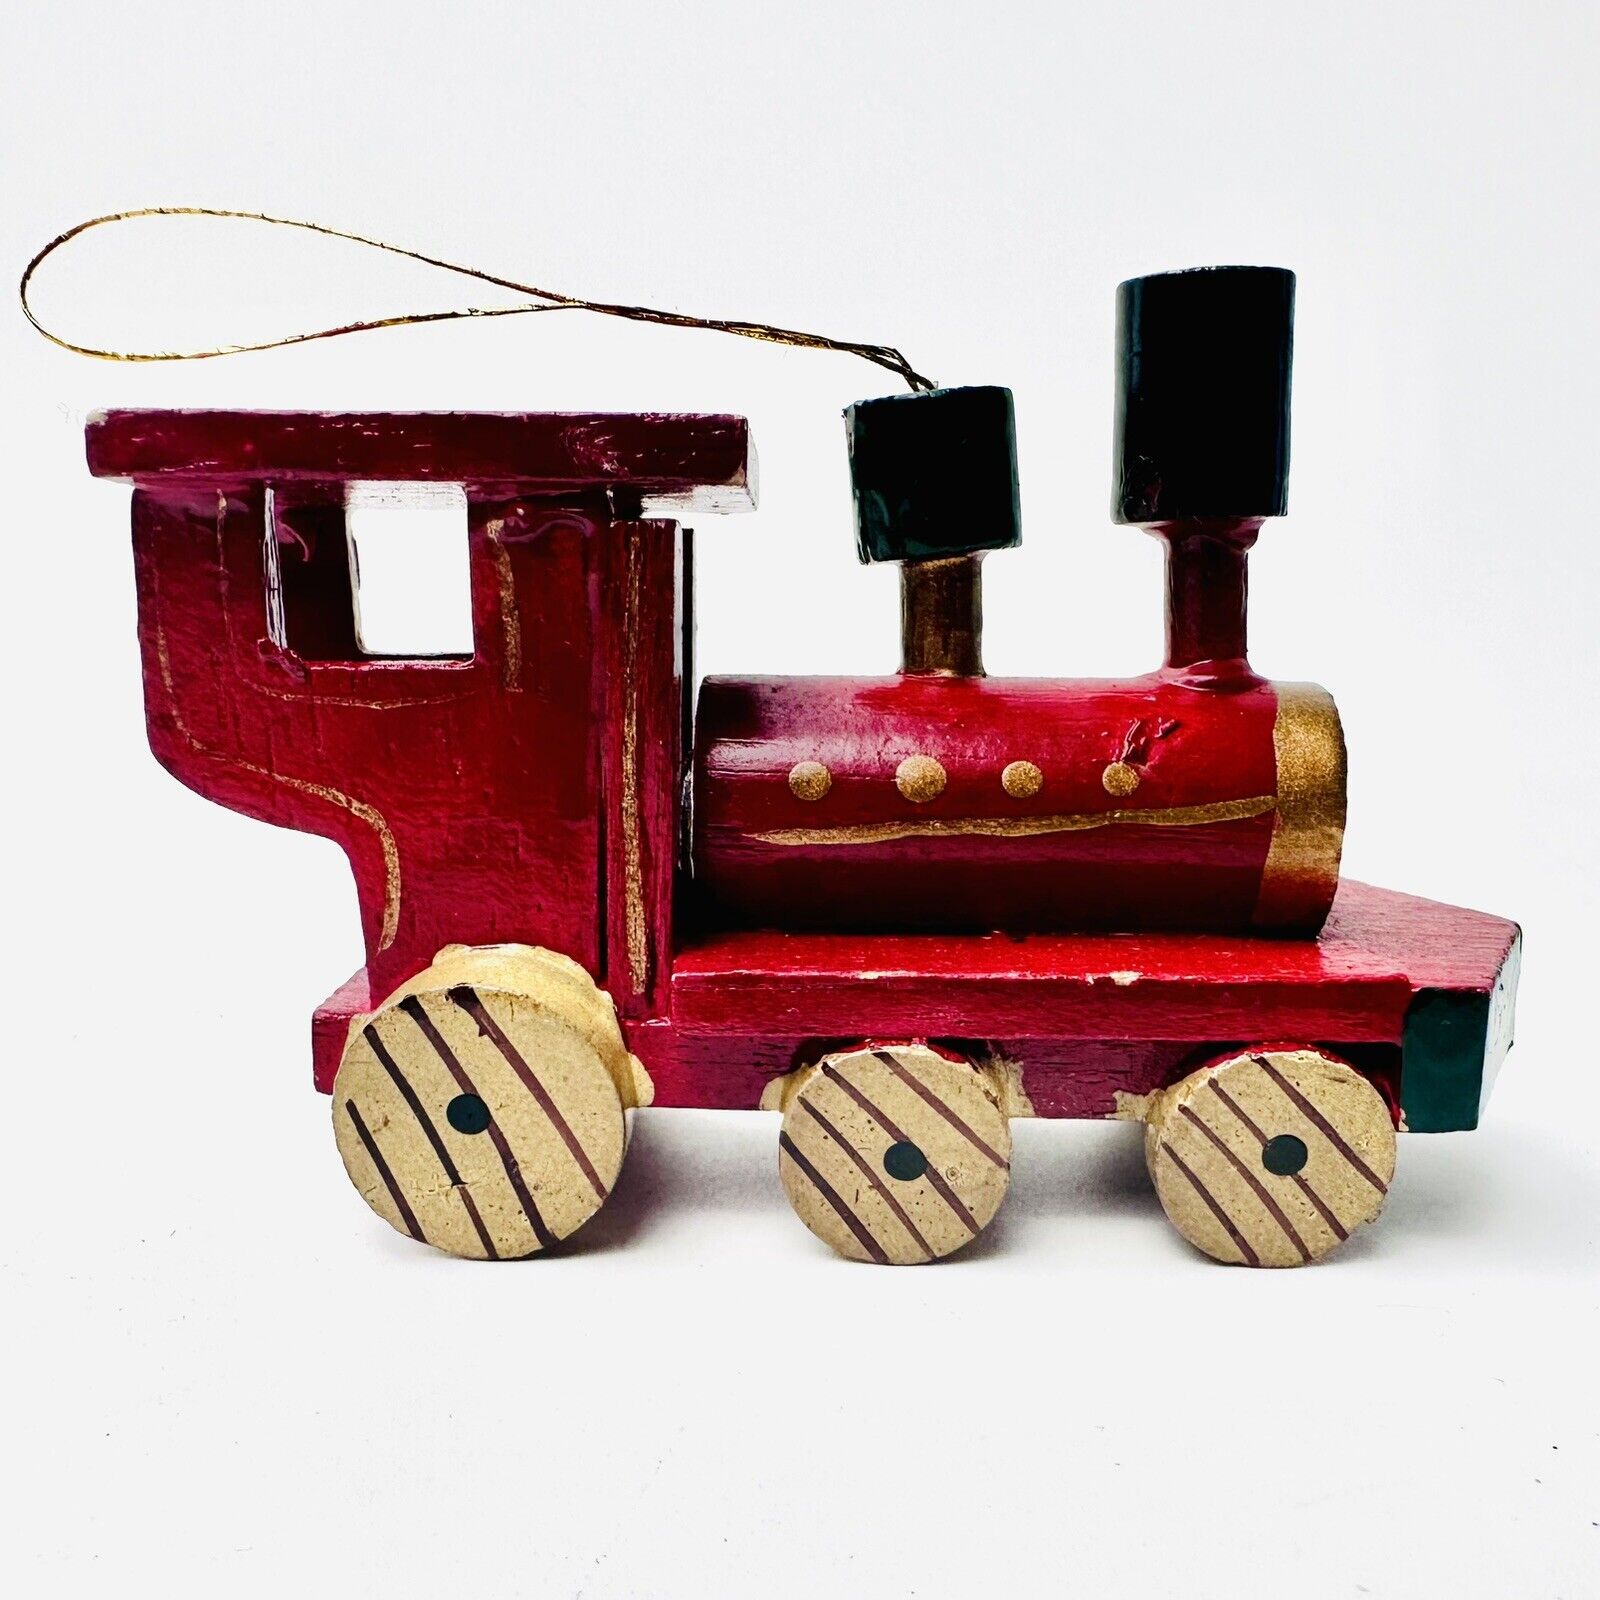 Vintage Russ Berrie Wooden Train Christmas Ornament Red Gold Accent Hand Painted